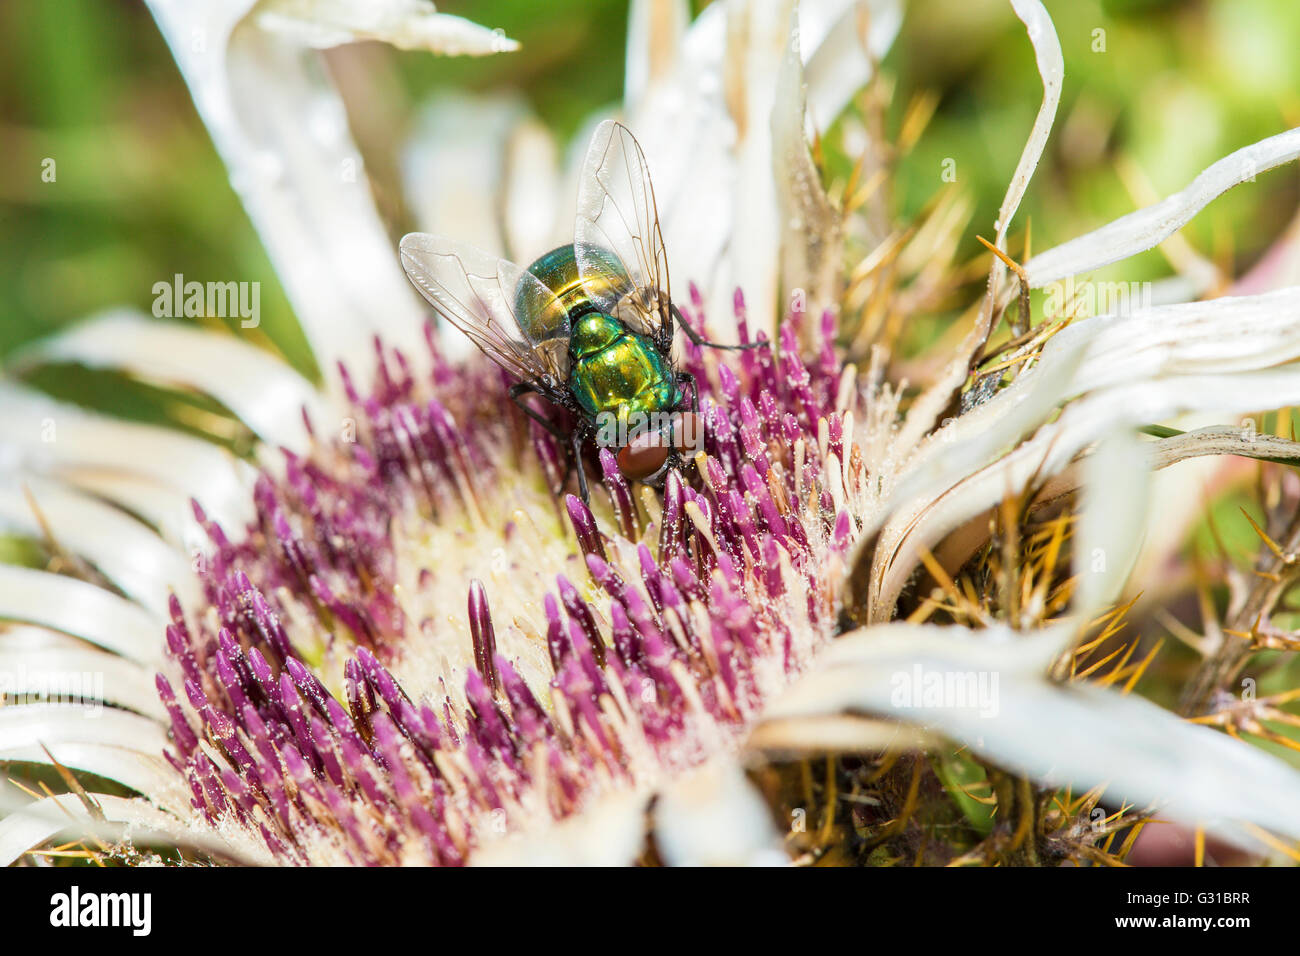 Common green bottle fly, Lucilia sericata, collecting pollen from a welted thistle flower. While larvae are necrophagous, adults Stock Photo